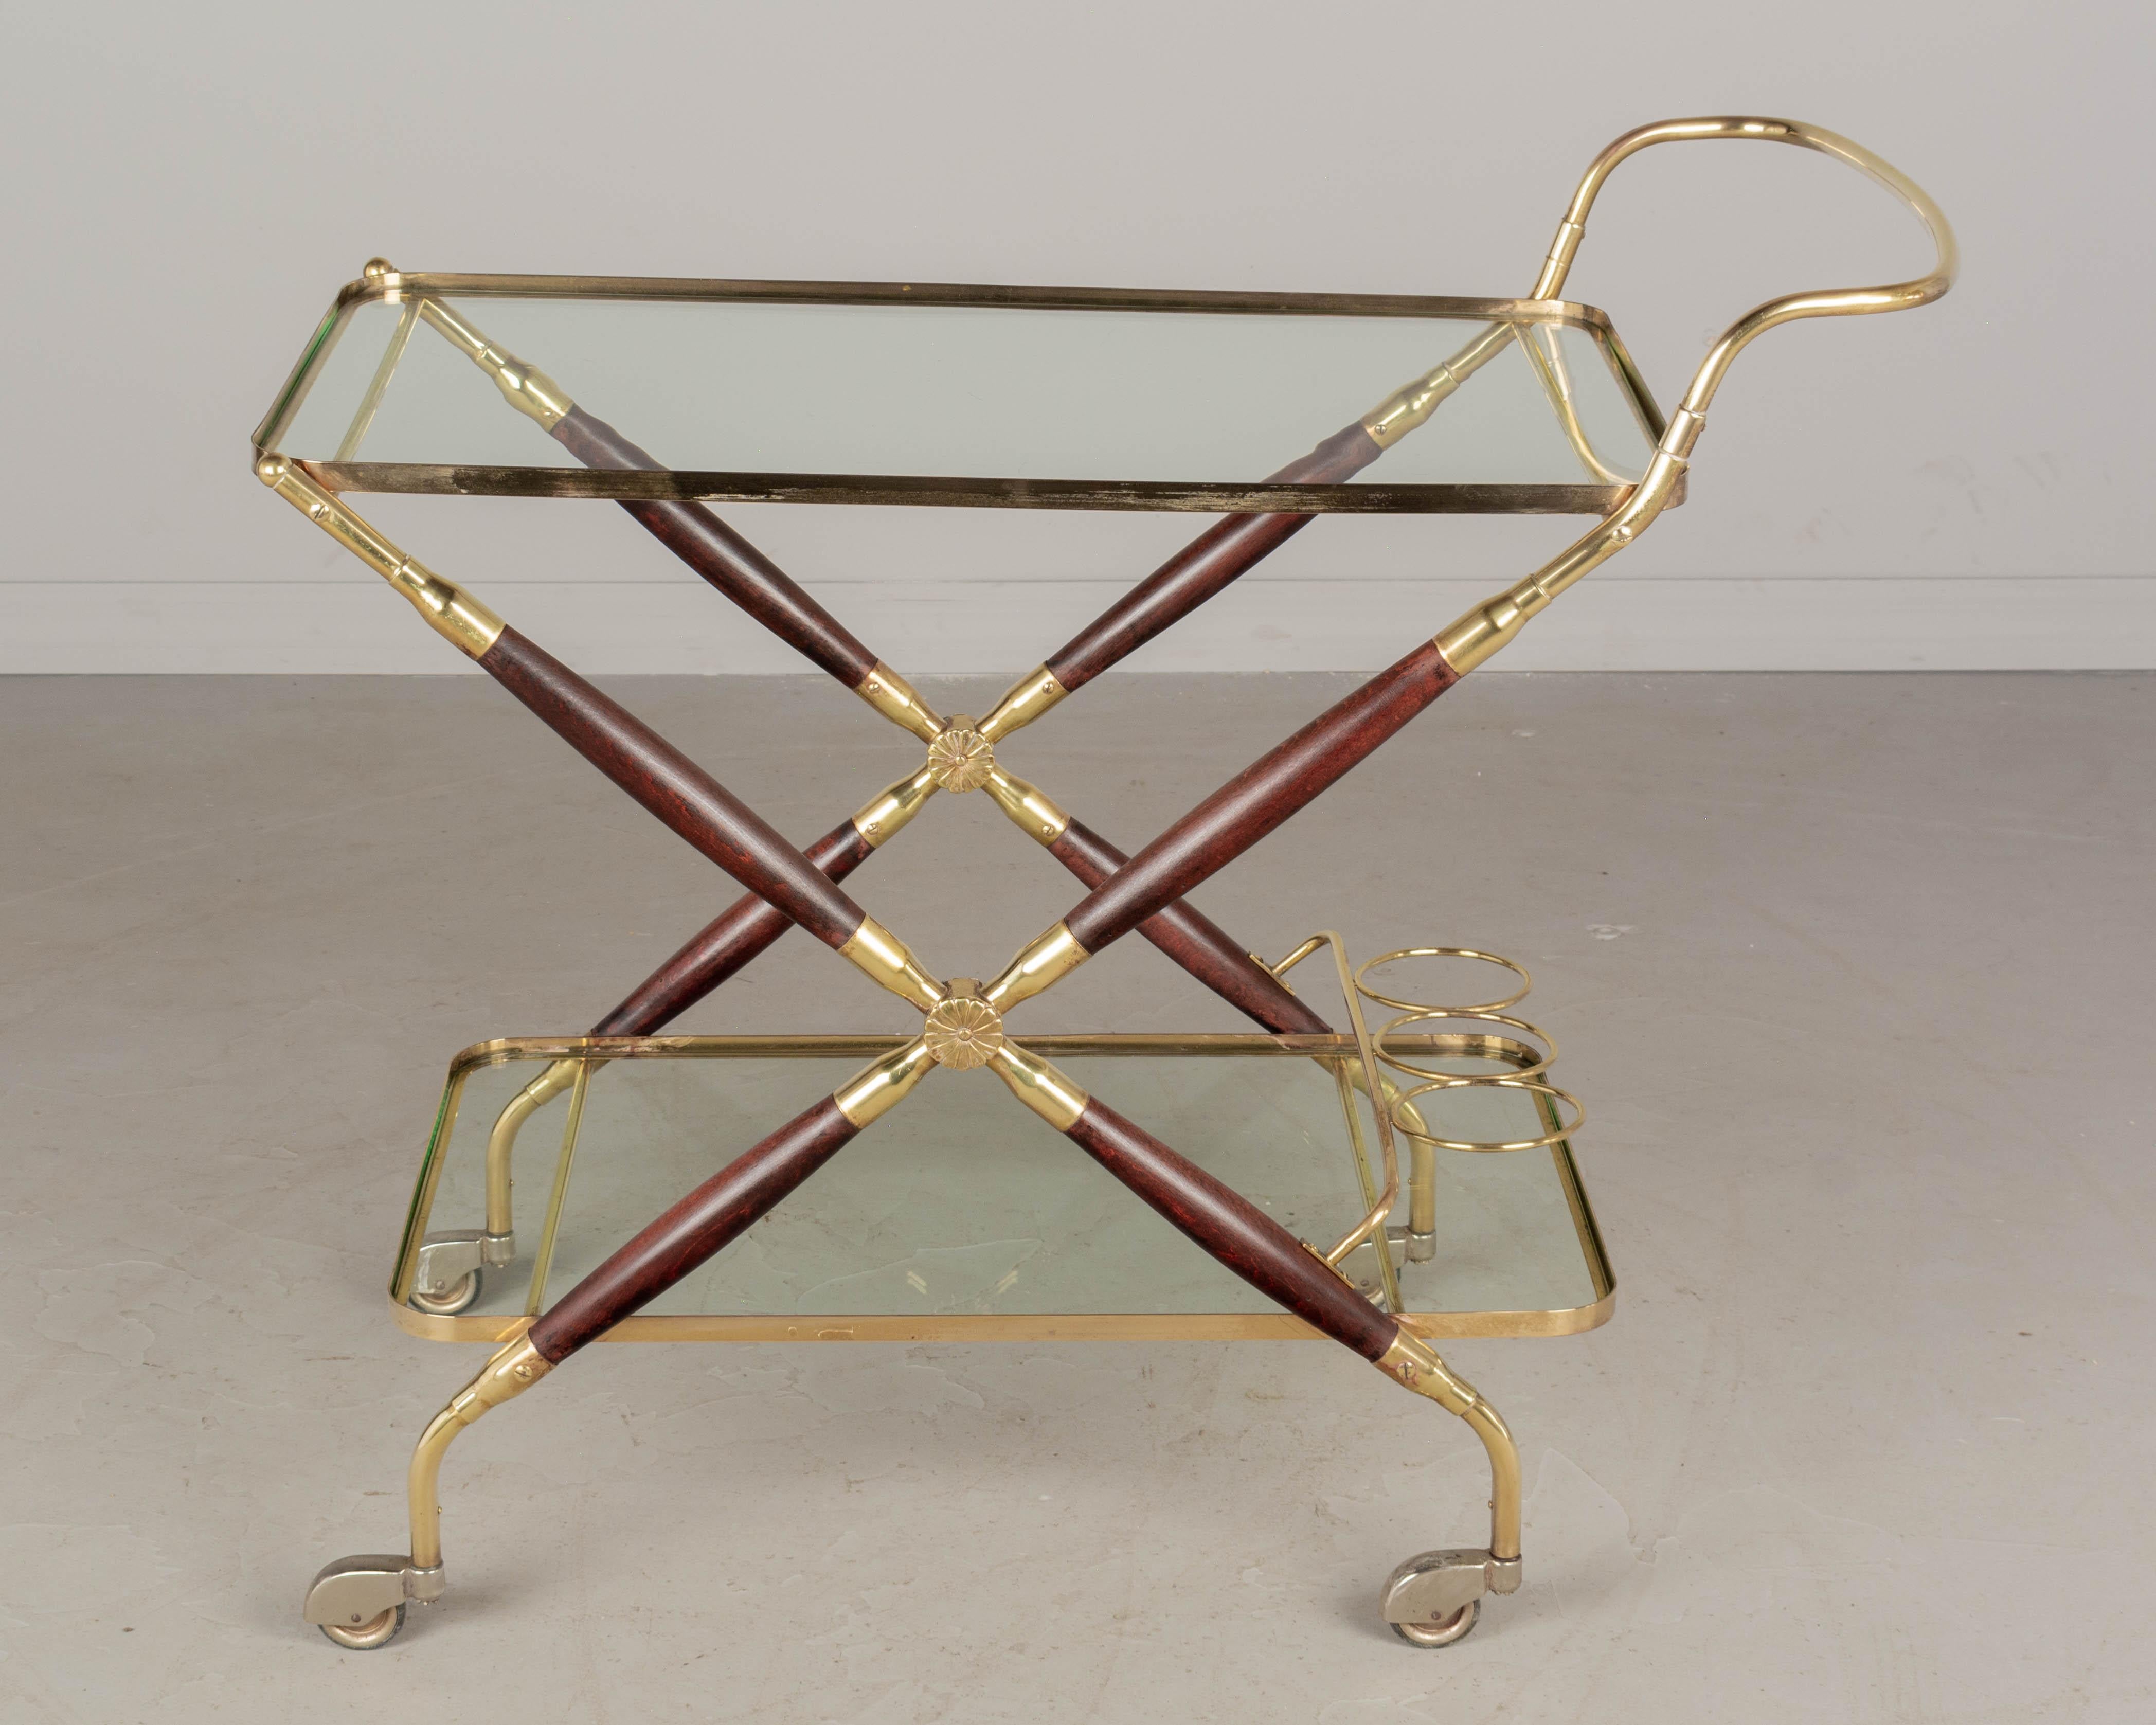 A Mid-Century Modern Italian bar cart by Cesare Lacca. A very nice high quality drinks trolley made of solid brass with turned mahogany stained beechwood x-frame and cast brass rosette details. Glass shelves with a three bottle rack on the bottom.